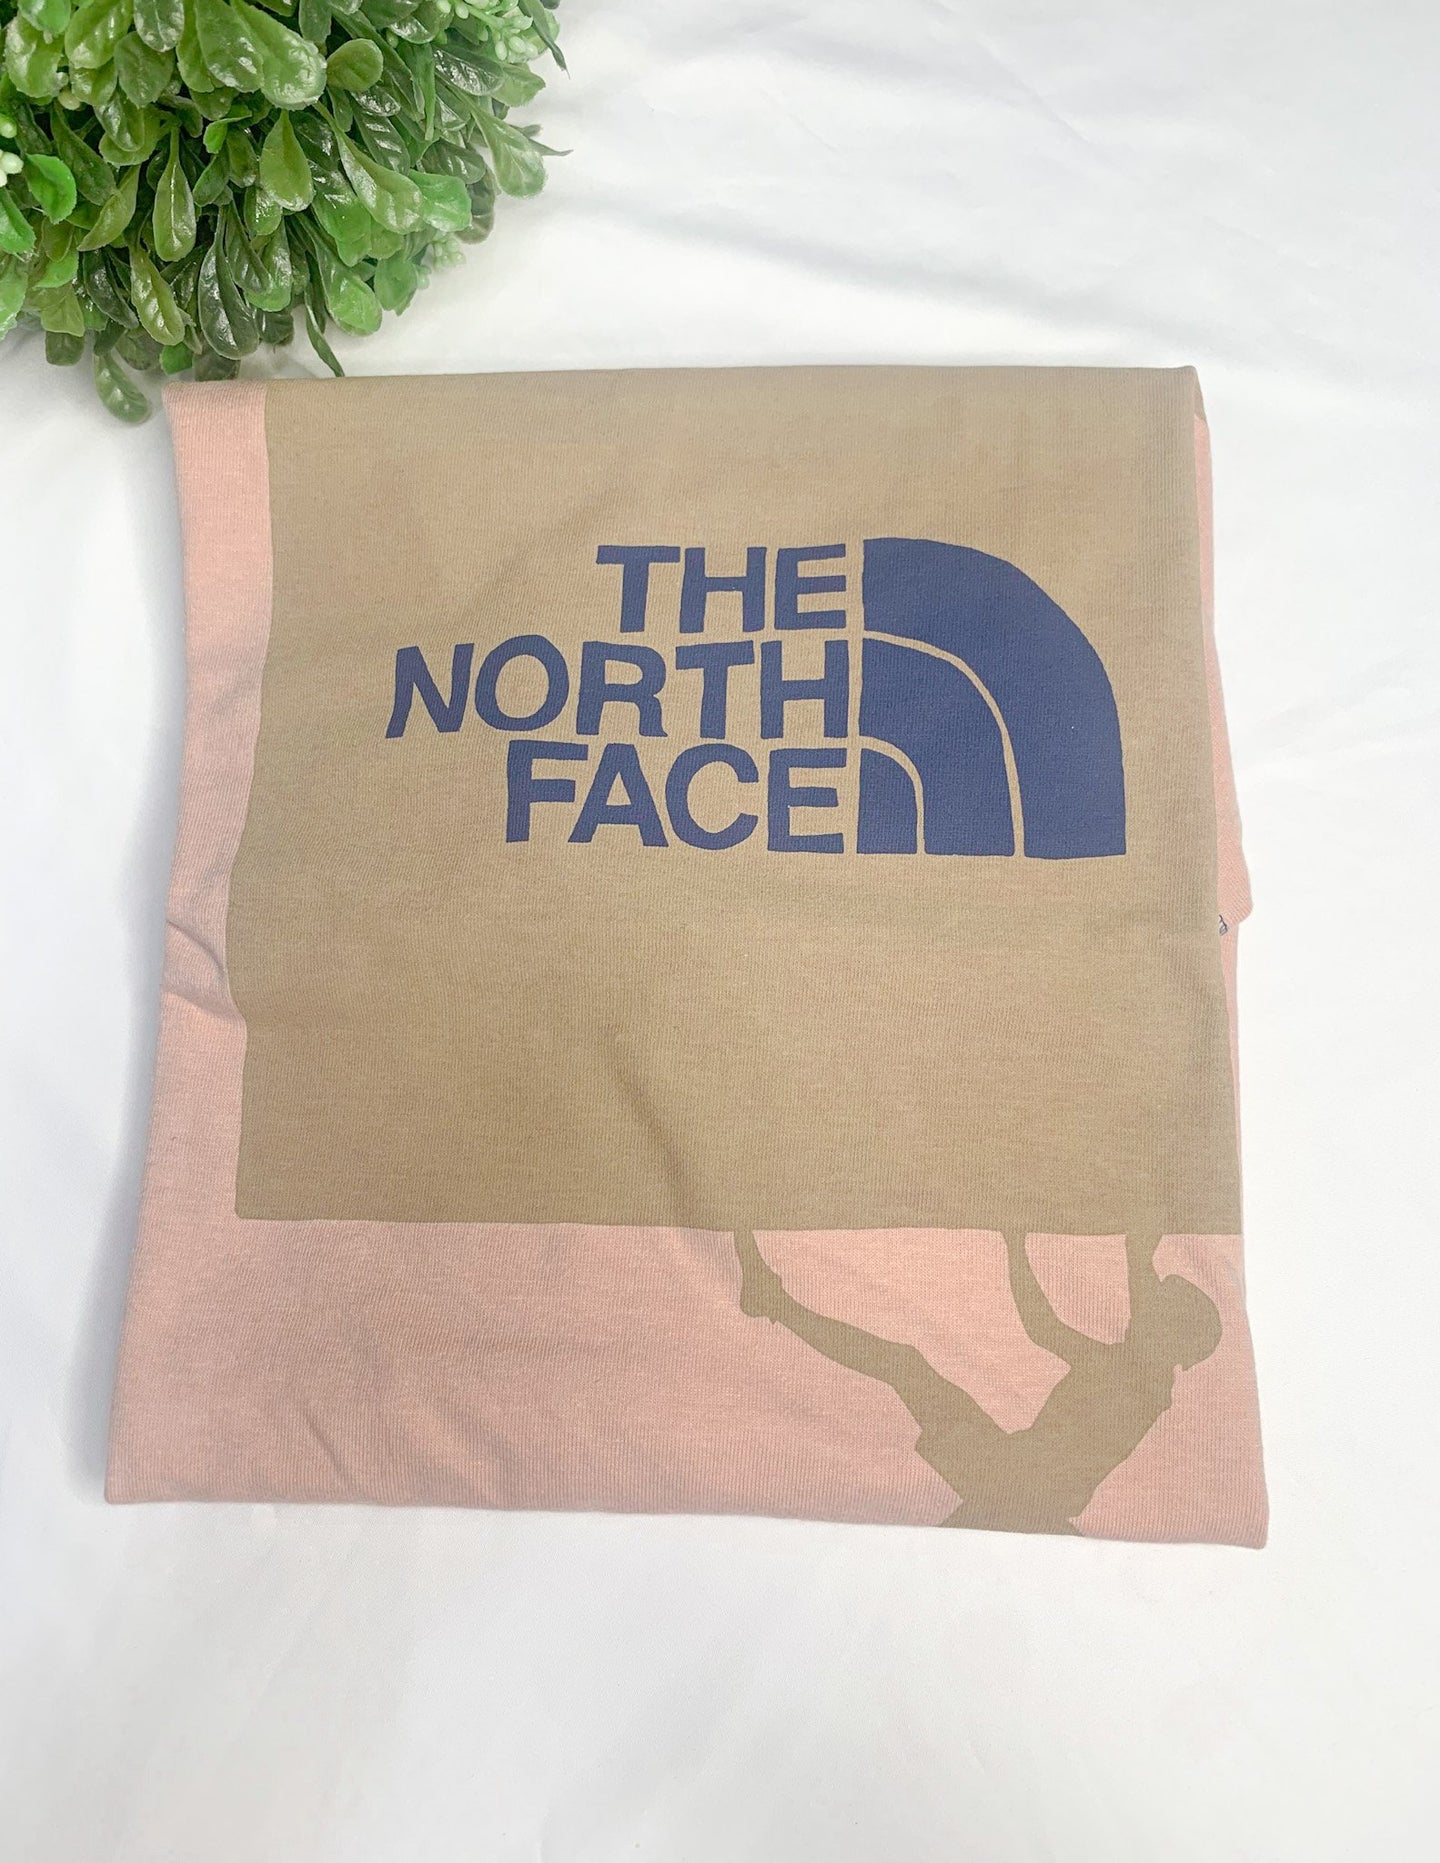 North Face Men's Dome Climb Short Sleeve Tee - Evening Sand Pink